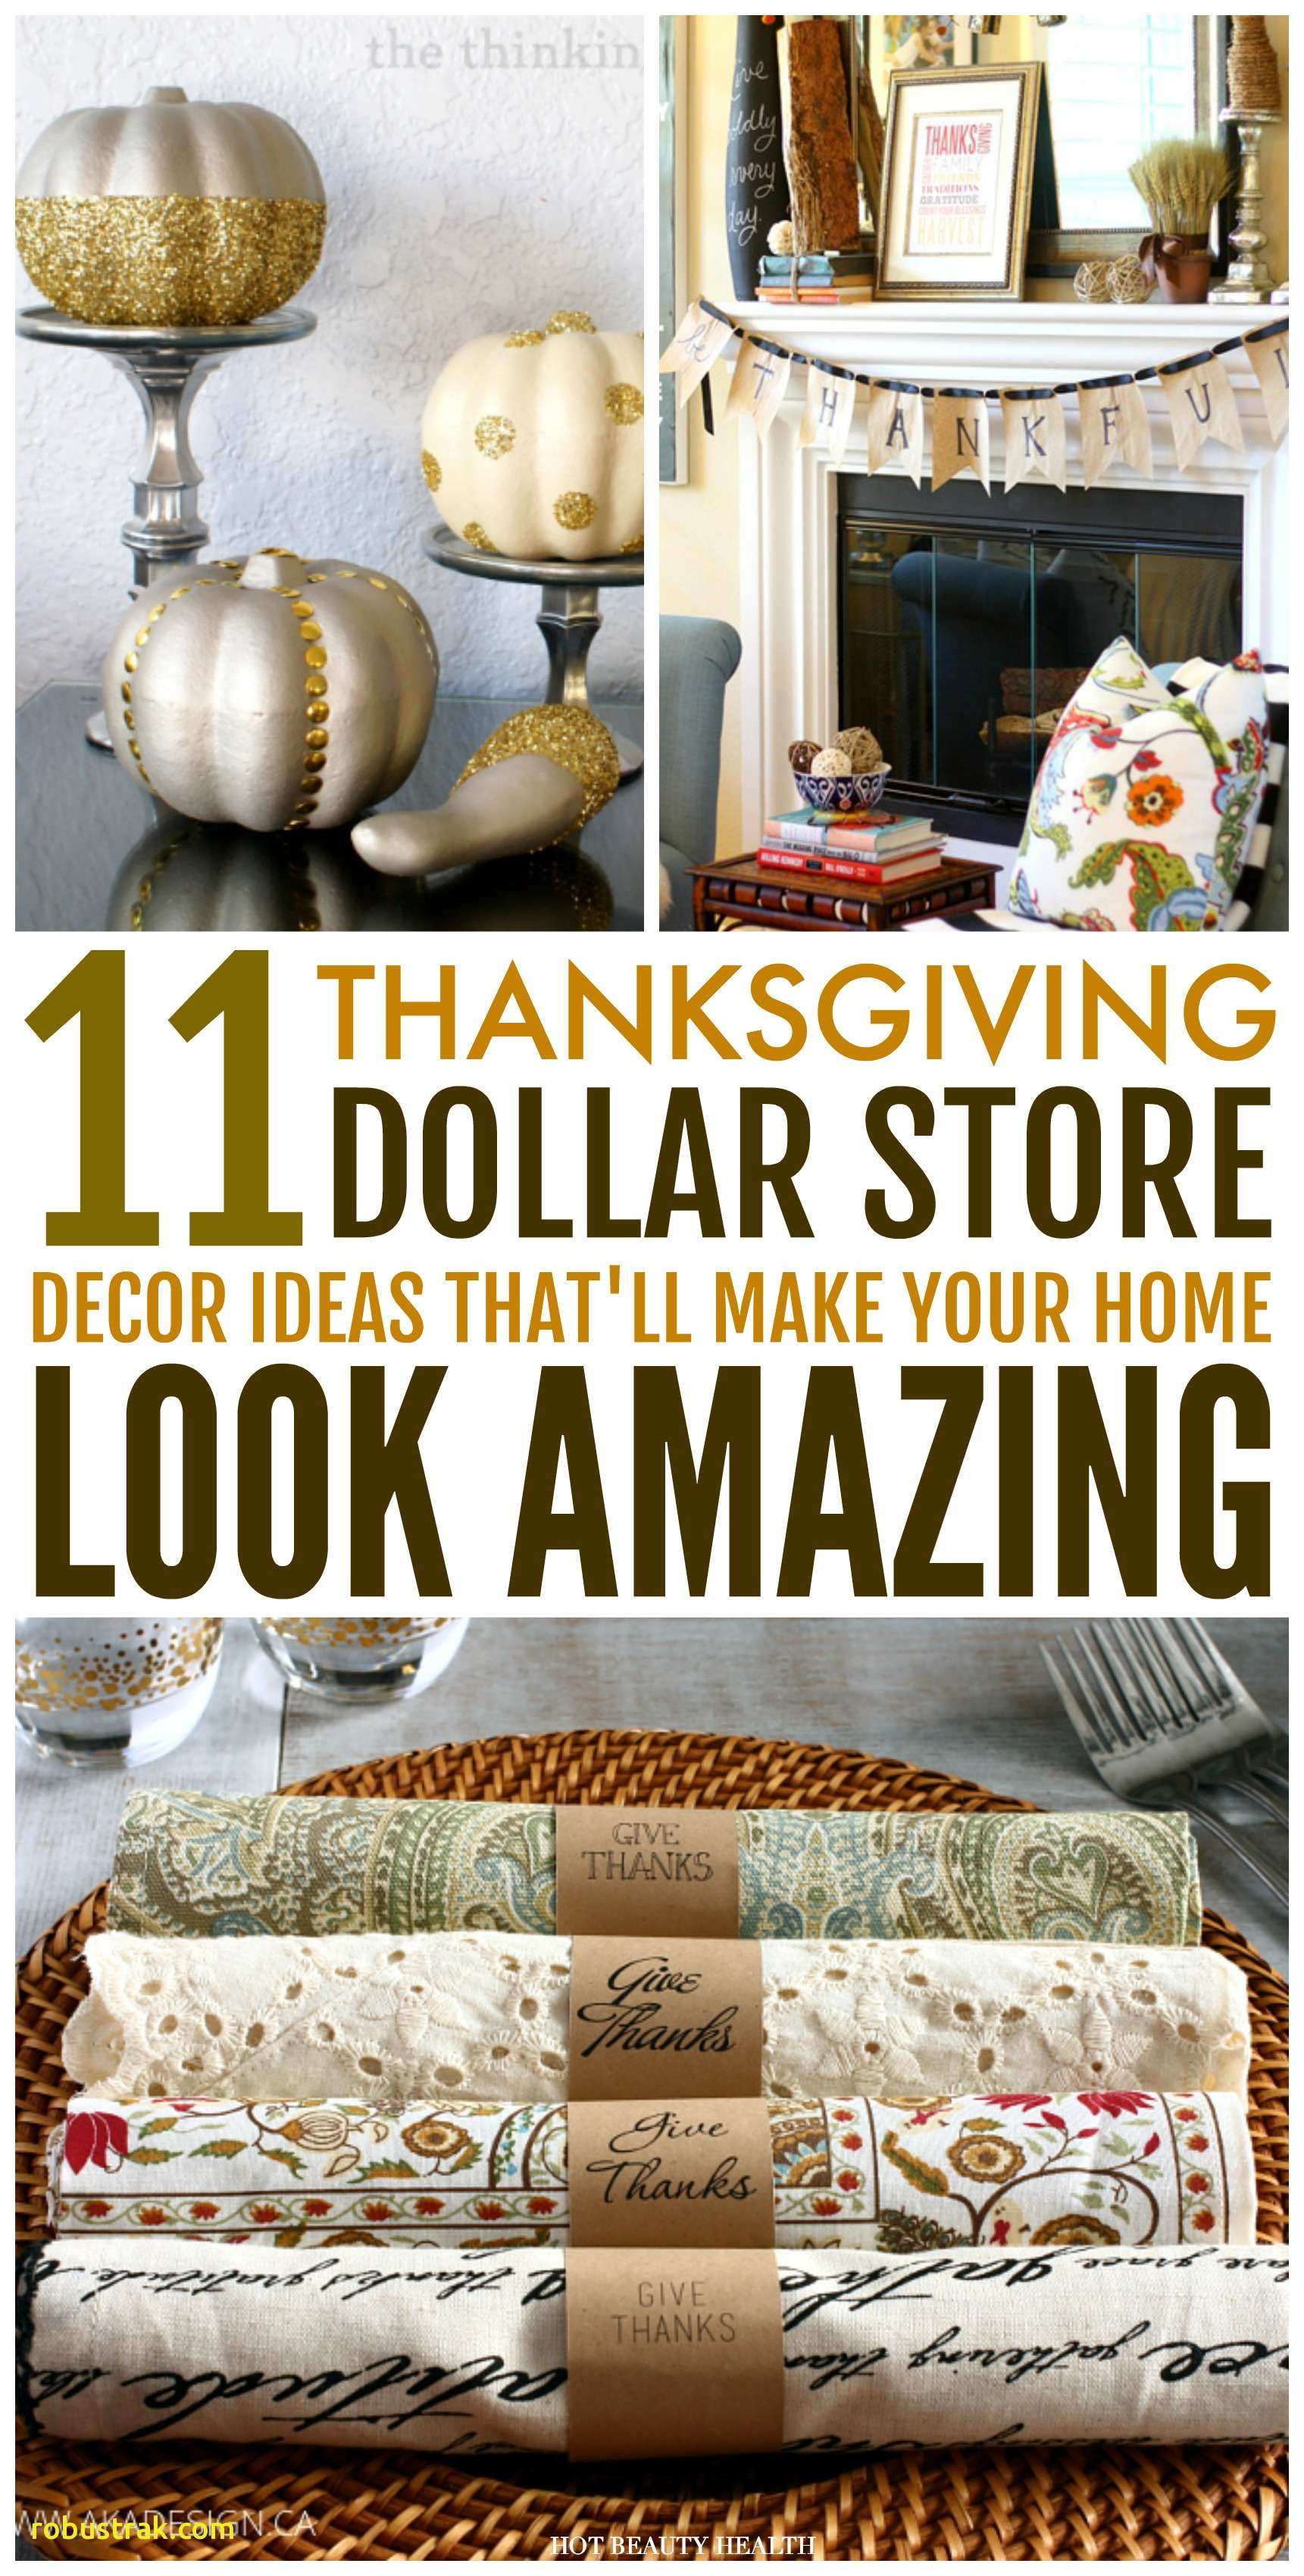 26 Famous Family Dollar Vases 2024 free download family dollar vases of unique dollar store room decor home design ideas for these 11 dollar store thanksgiving decor hacks are amazing these home decor ideas are super